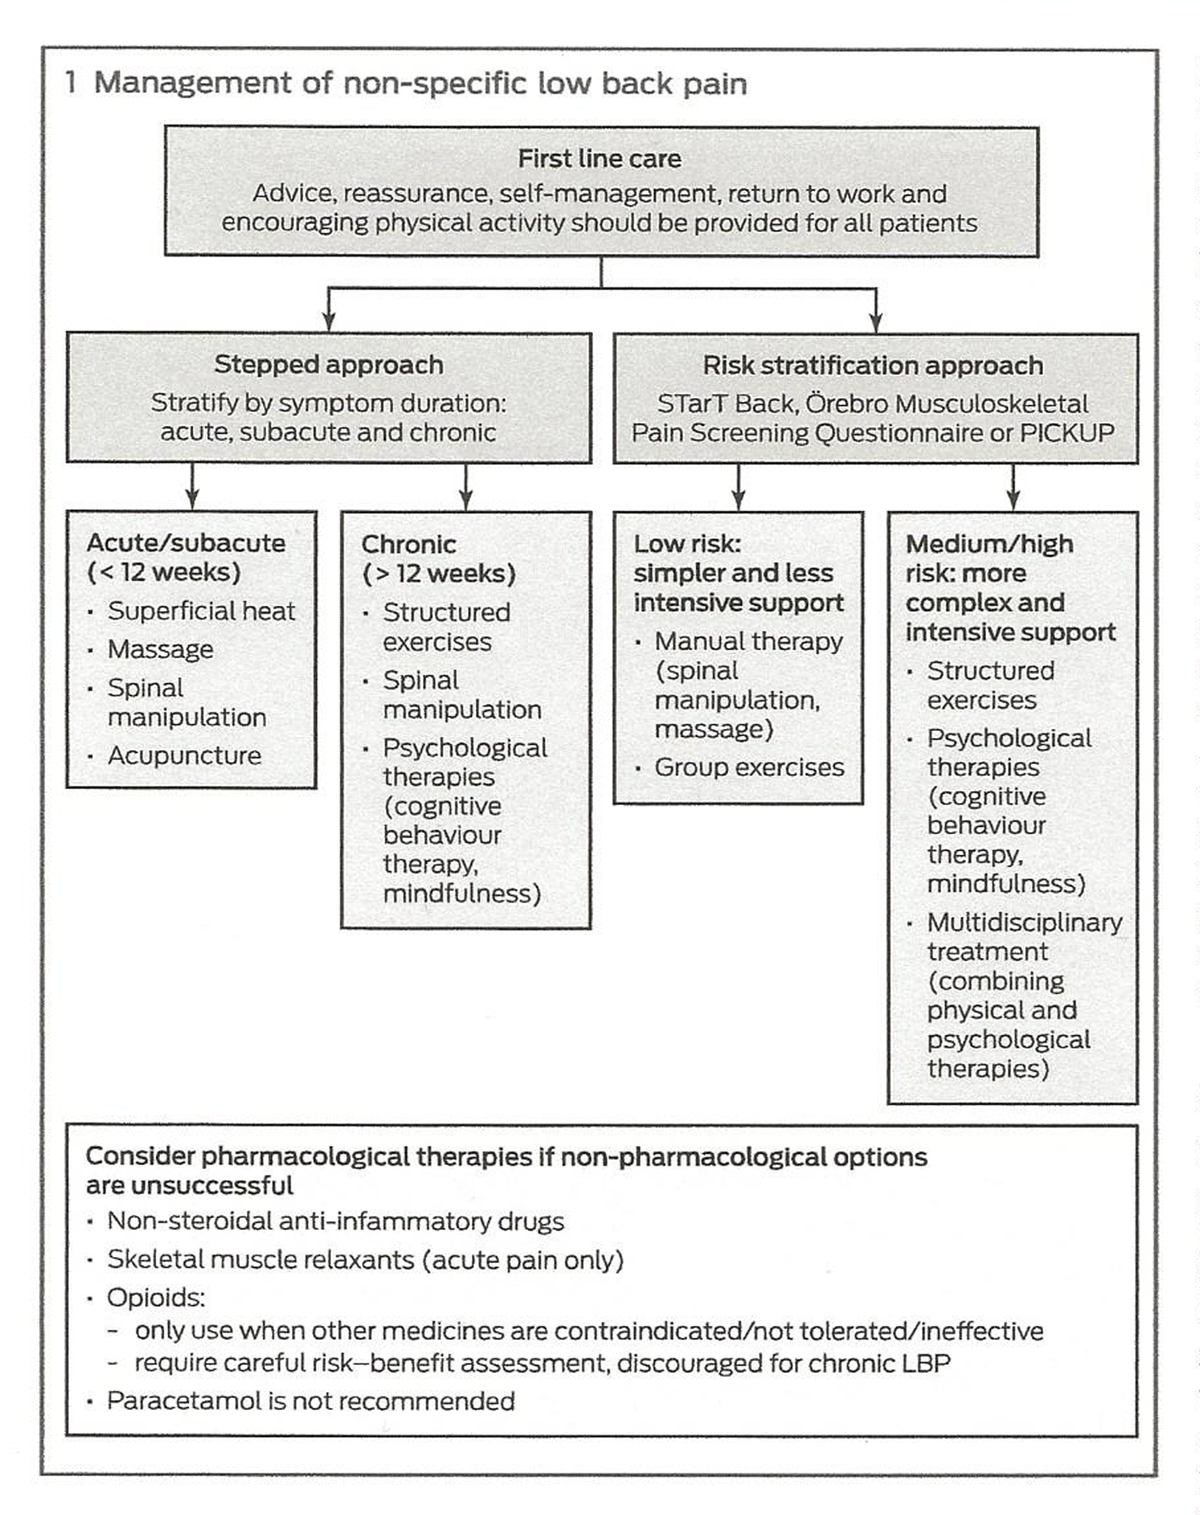 PDF) Primary care management of non-specific low back pain: key